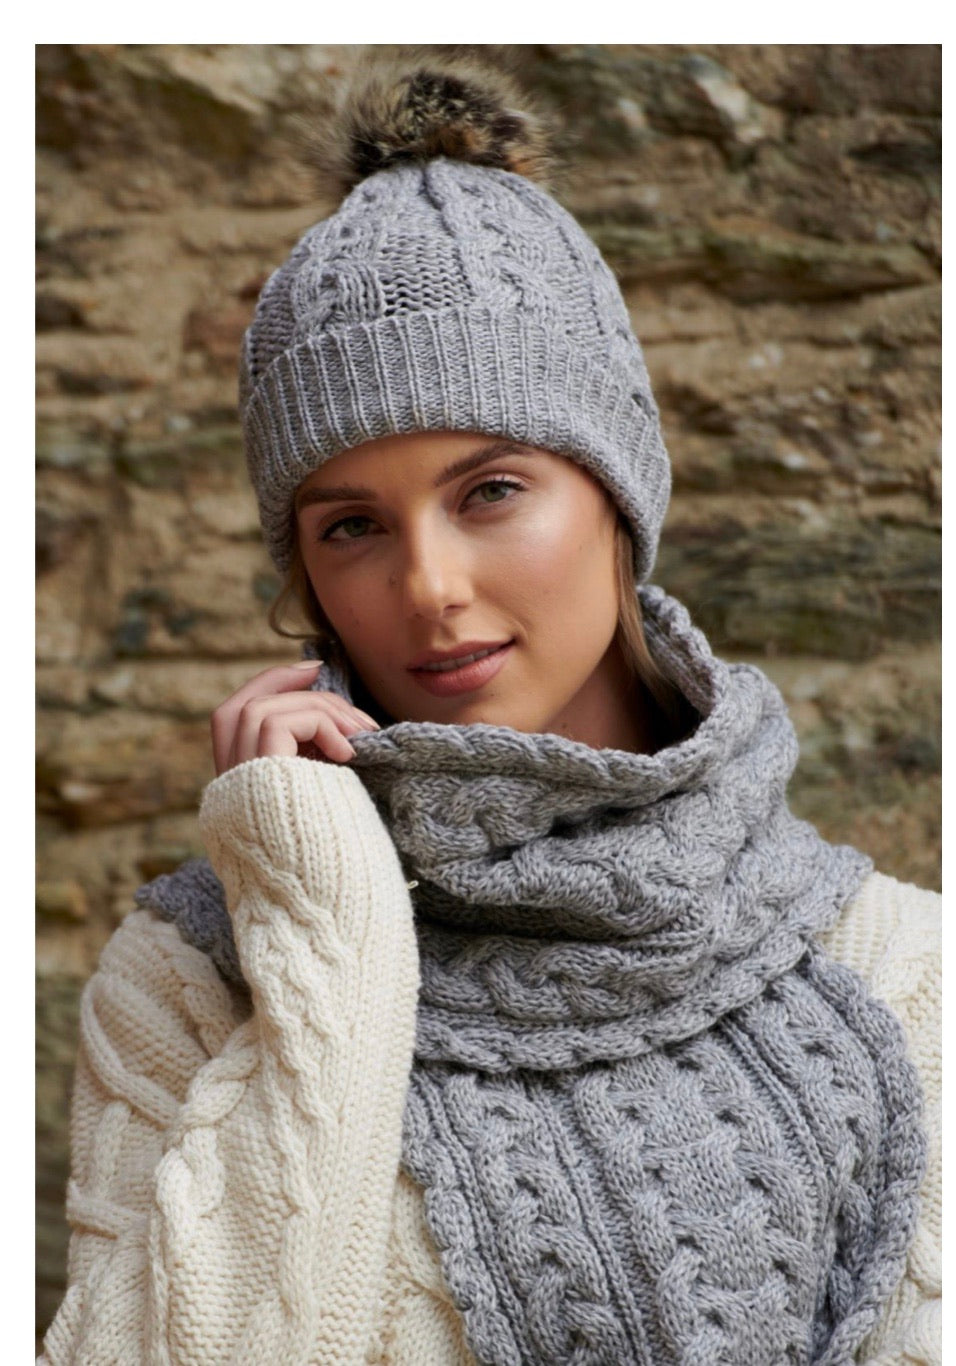 CHUNKY CABLE SCARF & HAT in light grey (sold separate but match as set)